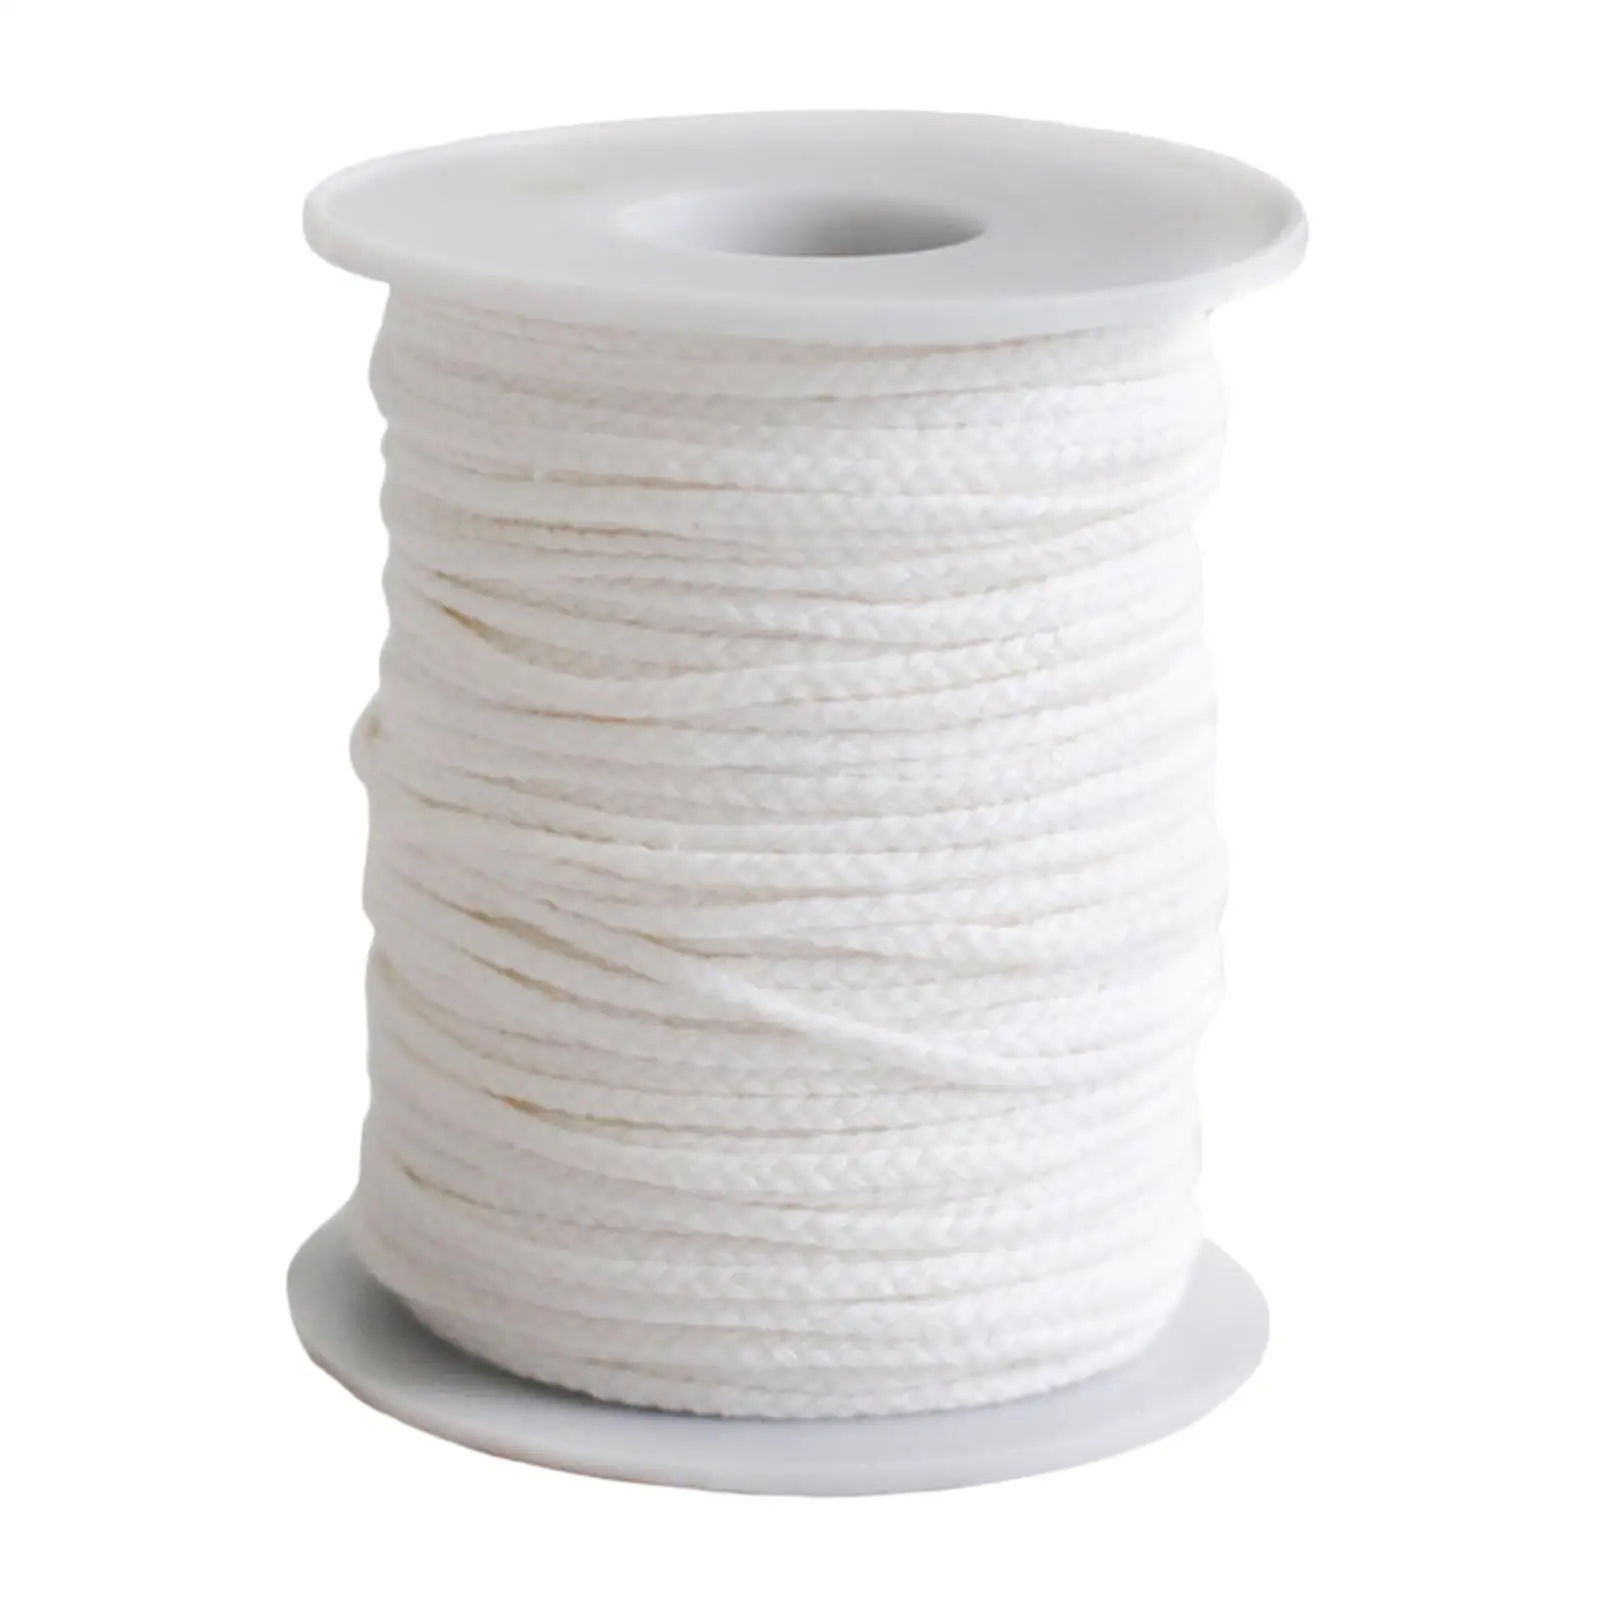 Braided Candle Wicks 400 Foot Total Candle String for Paraffin Wax Candle Making